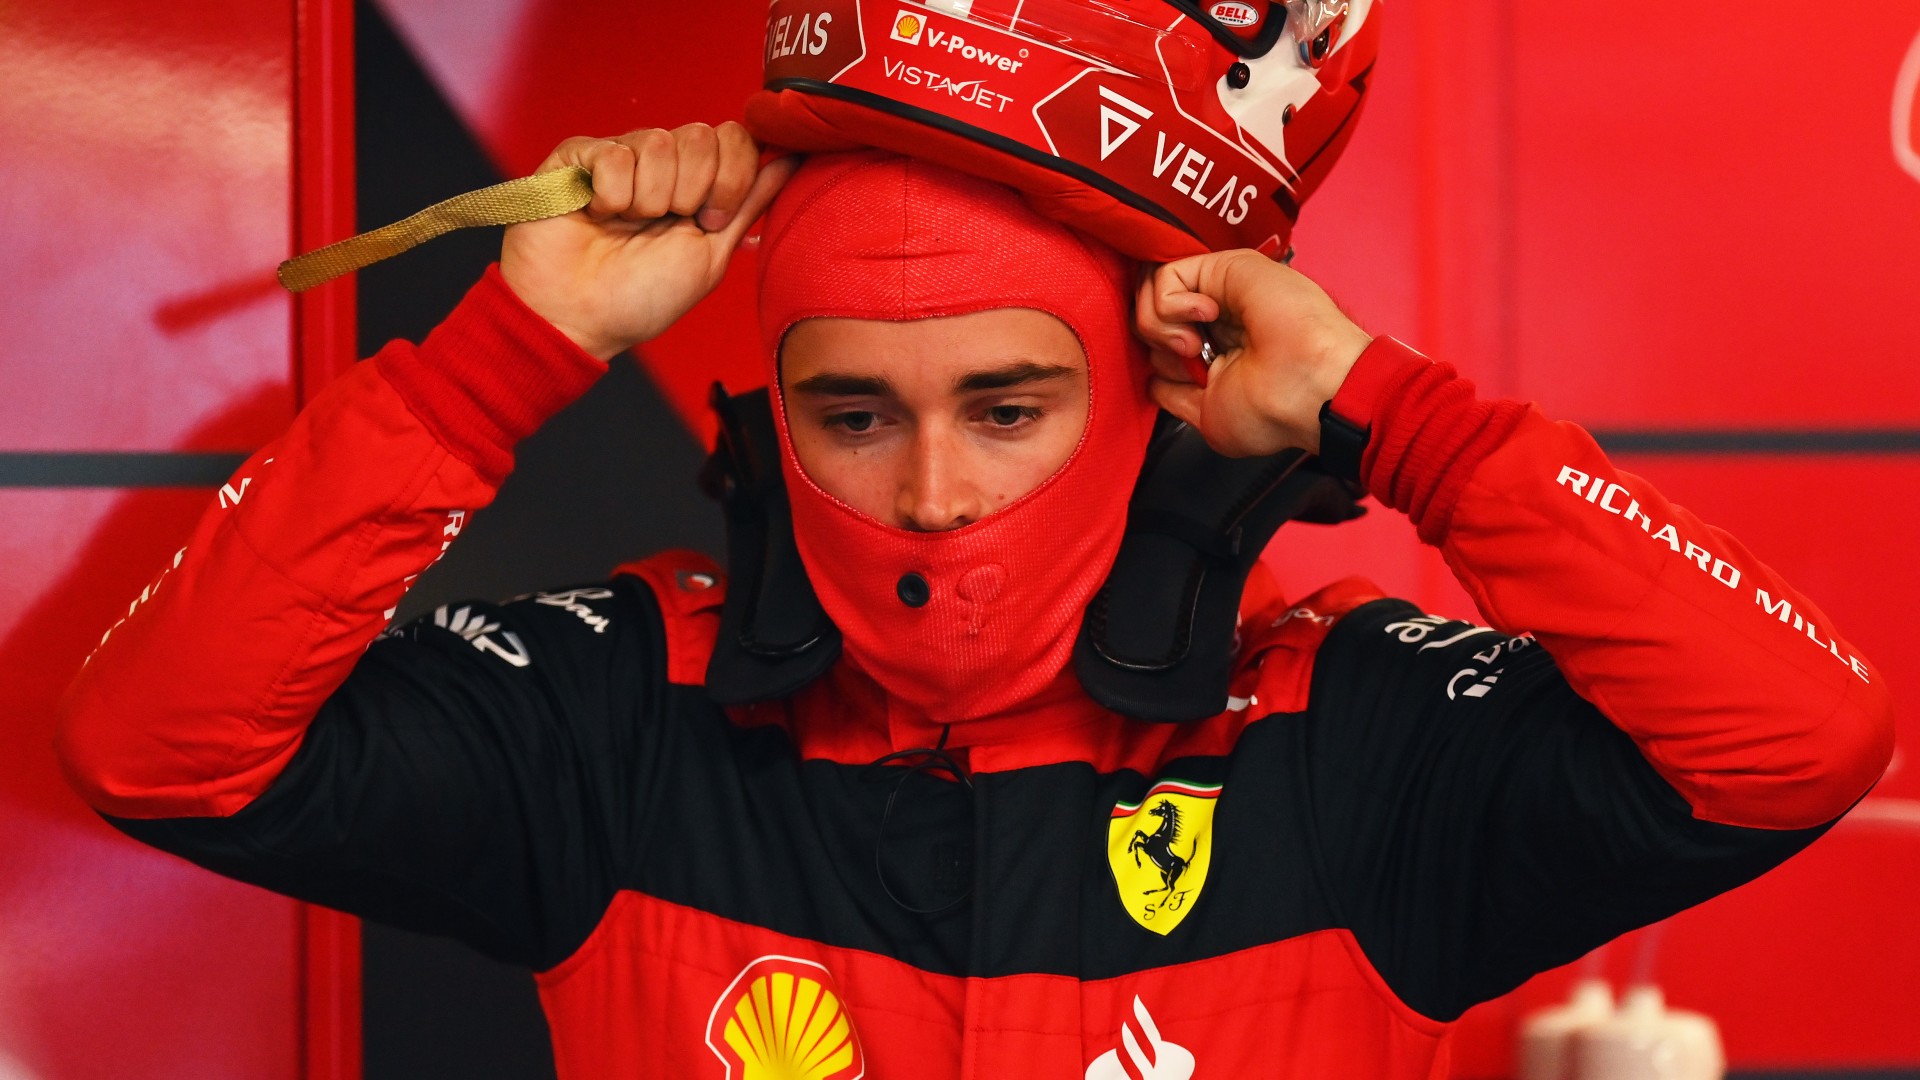 Ferrari driver Charles Leclerc receives 10-place grid penalty after engine change